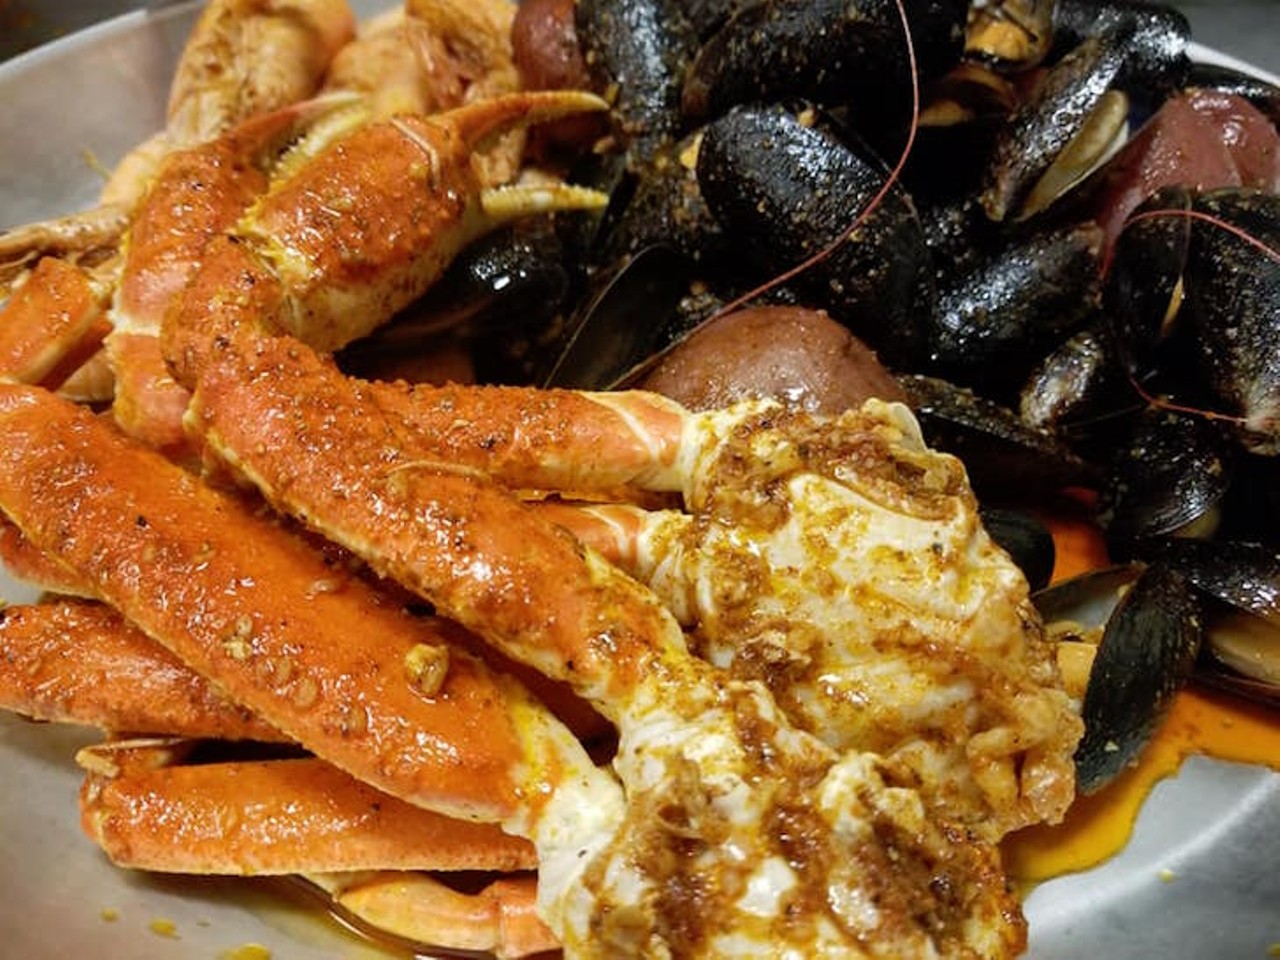 J Crab House  
4807 Irlo Bronson Memorial Highway, Kissimmee, 407-250-3914
This place may look like a tiny hole-in-the-wall, but don&#146;t be fooled. Tie a bib around your neck and get crackin&#146; on fresh crab, shrimp and more. 
Photo via J Crab House/Facebook